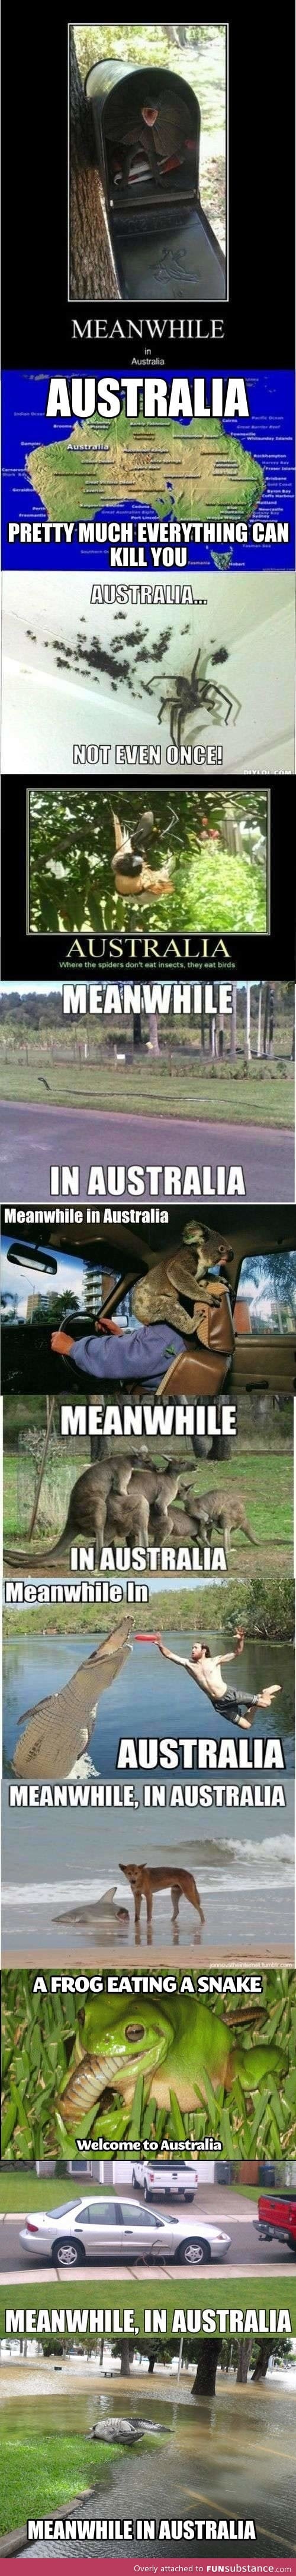 Meanwhile in australia compilation